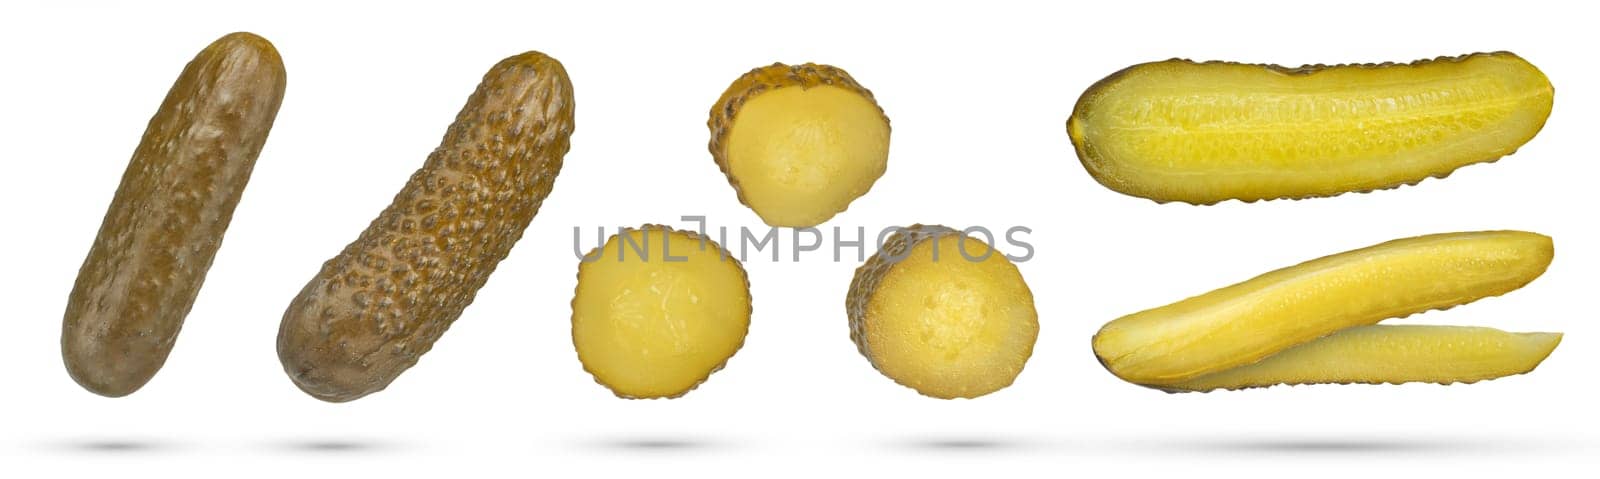 Set of pickles on a white isolated background. Pickled cucumbers of different sizes and cutting methods on a white background. The concept of canning, pickling and harvesting vegetables